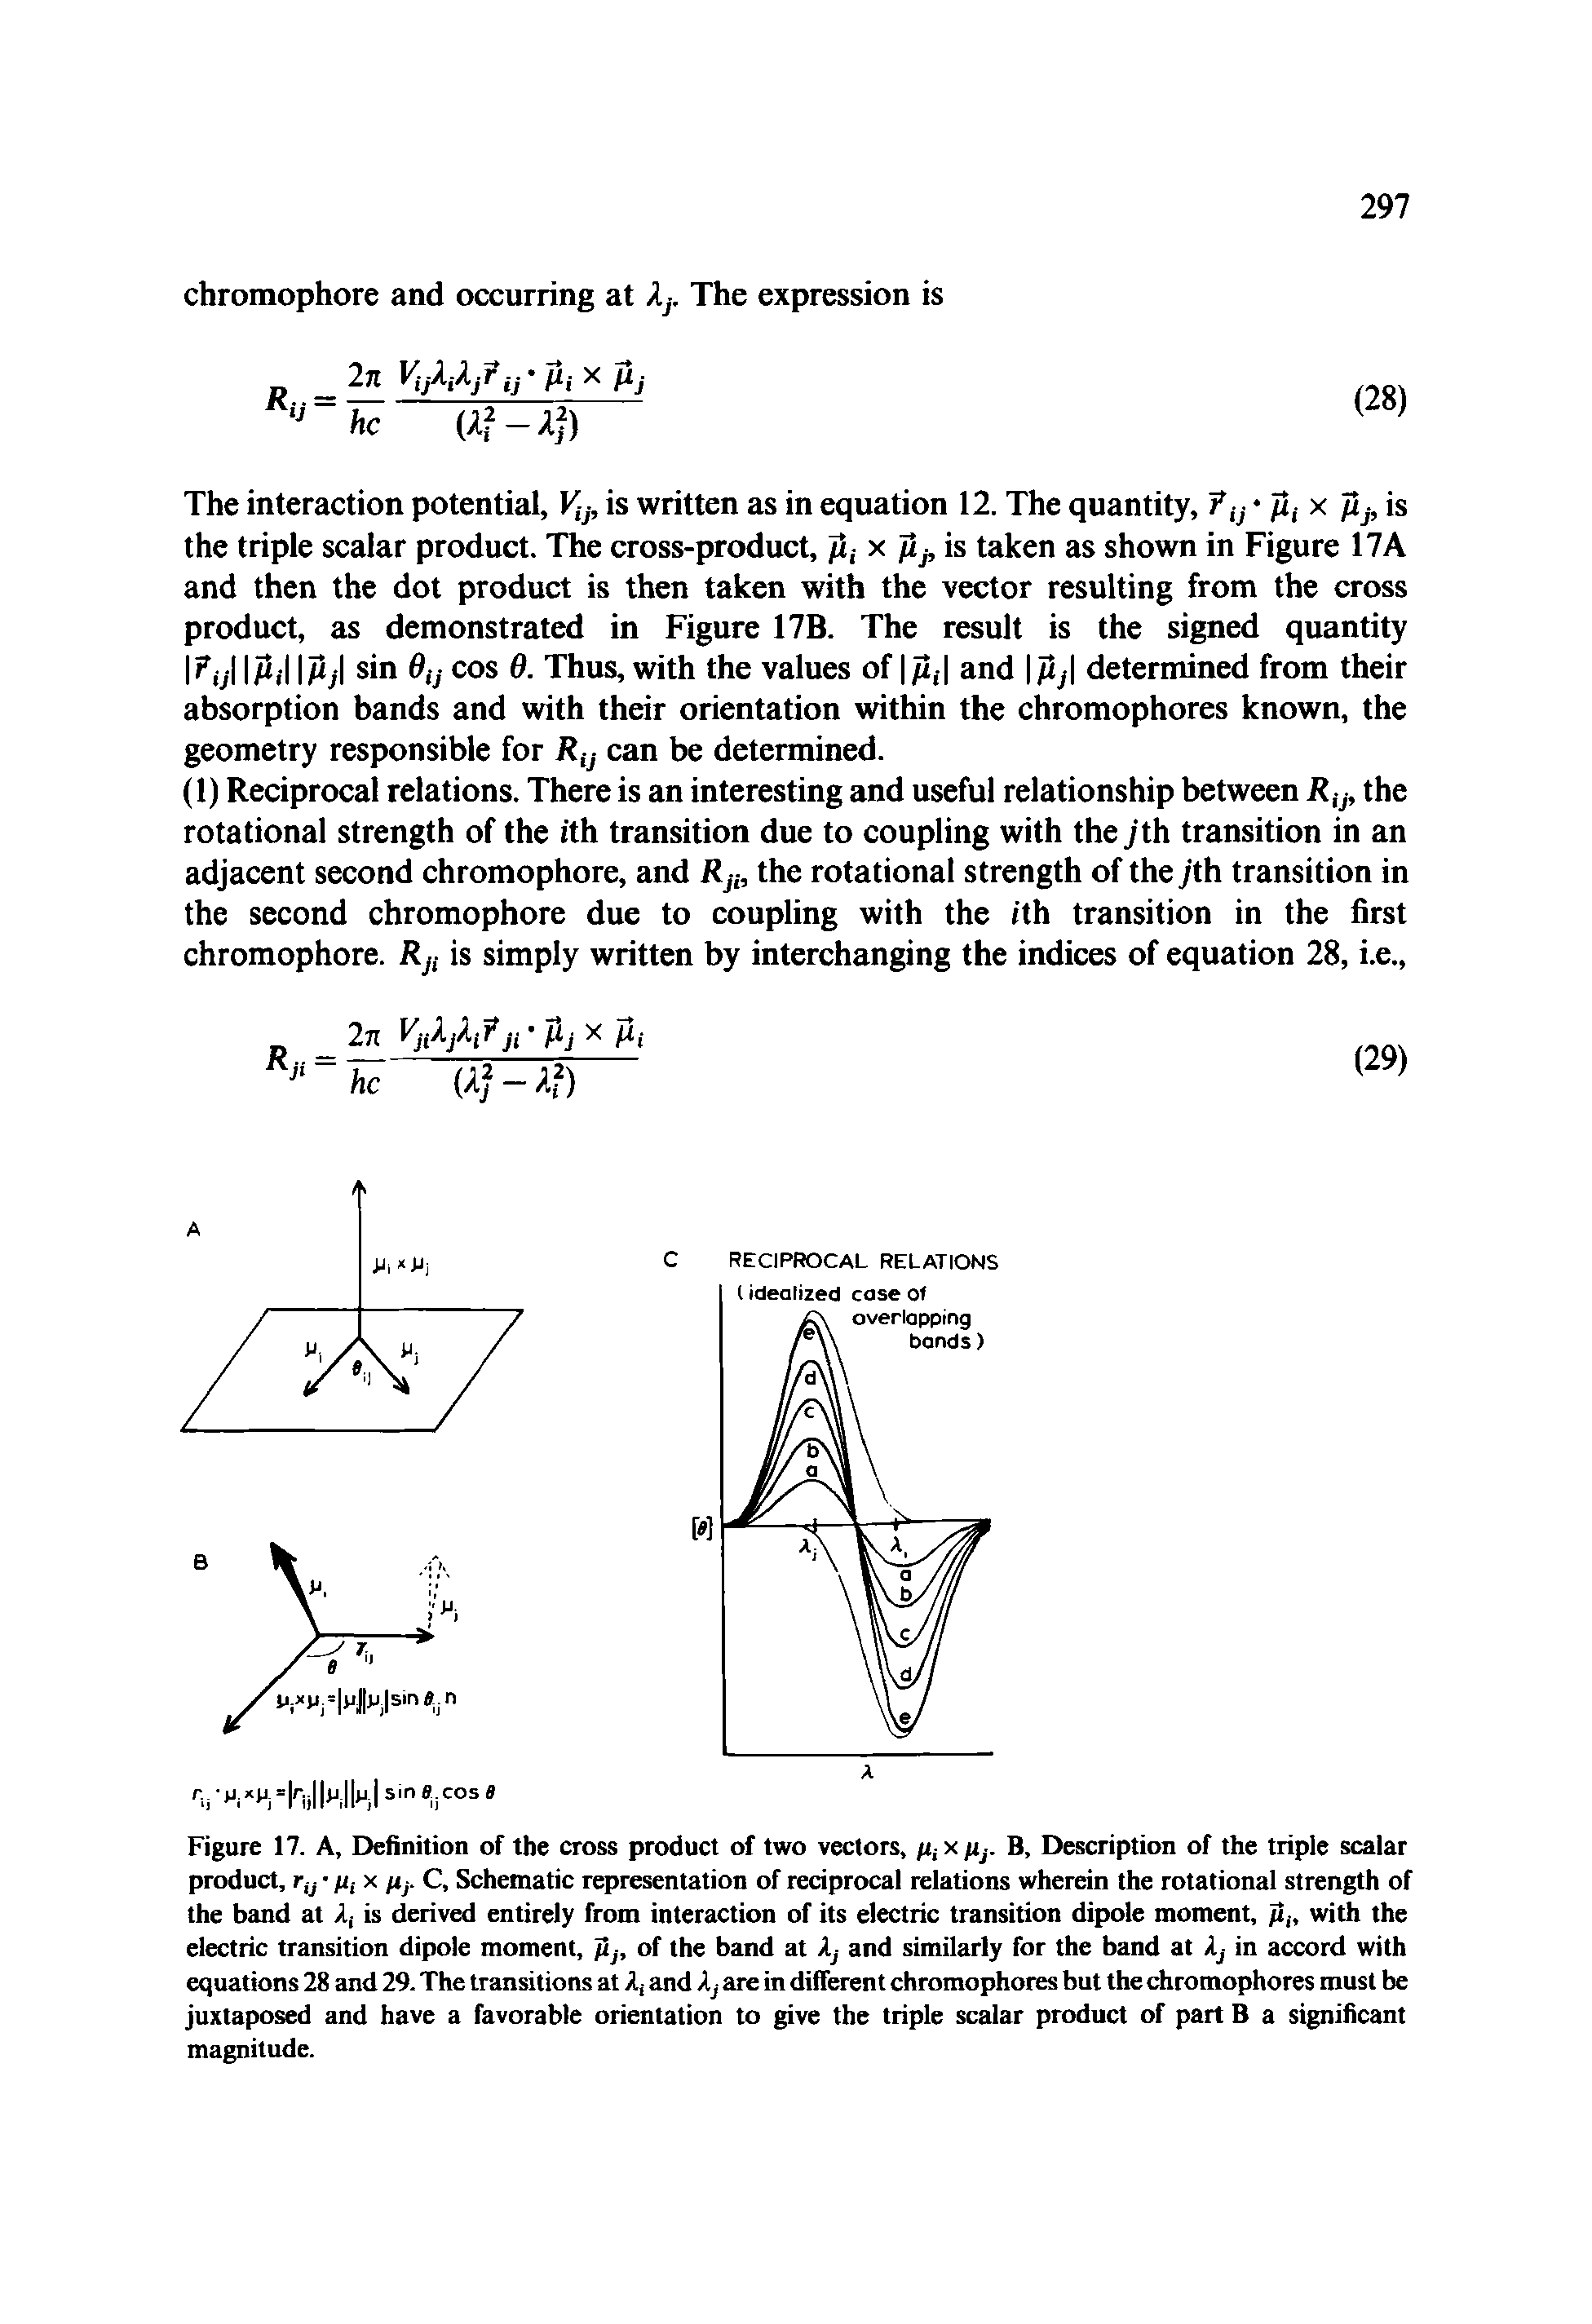 Figure 17. A, Definition of the cross product of two vectors, B, Description of the triple scalar...